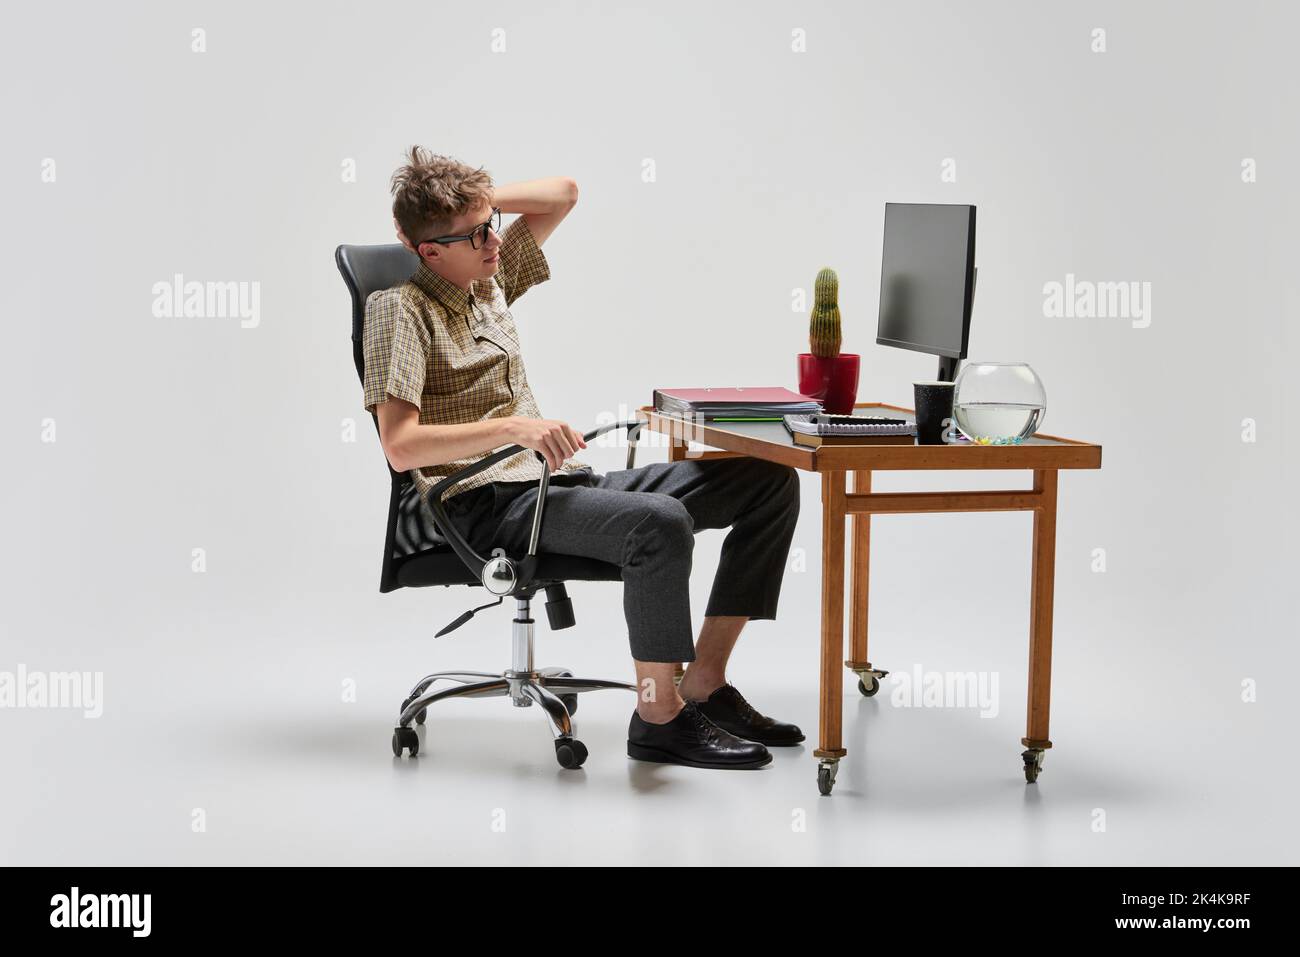 Portrait of smart and serious student sitting at computer desk and studying. Business, studying, education, youth, remote workplace concept Stock Photo